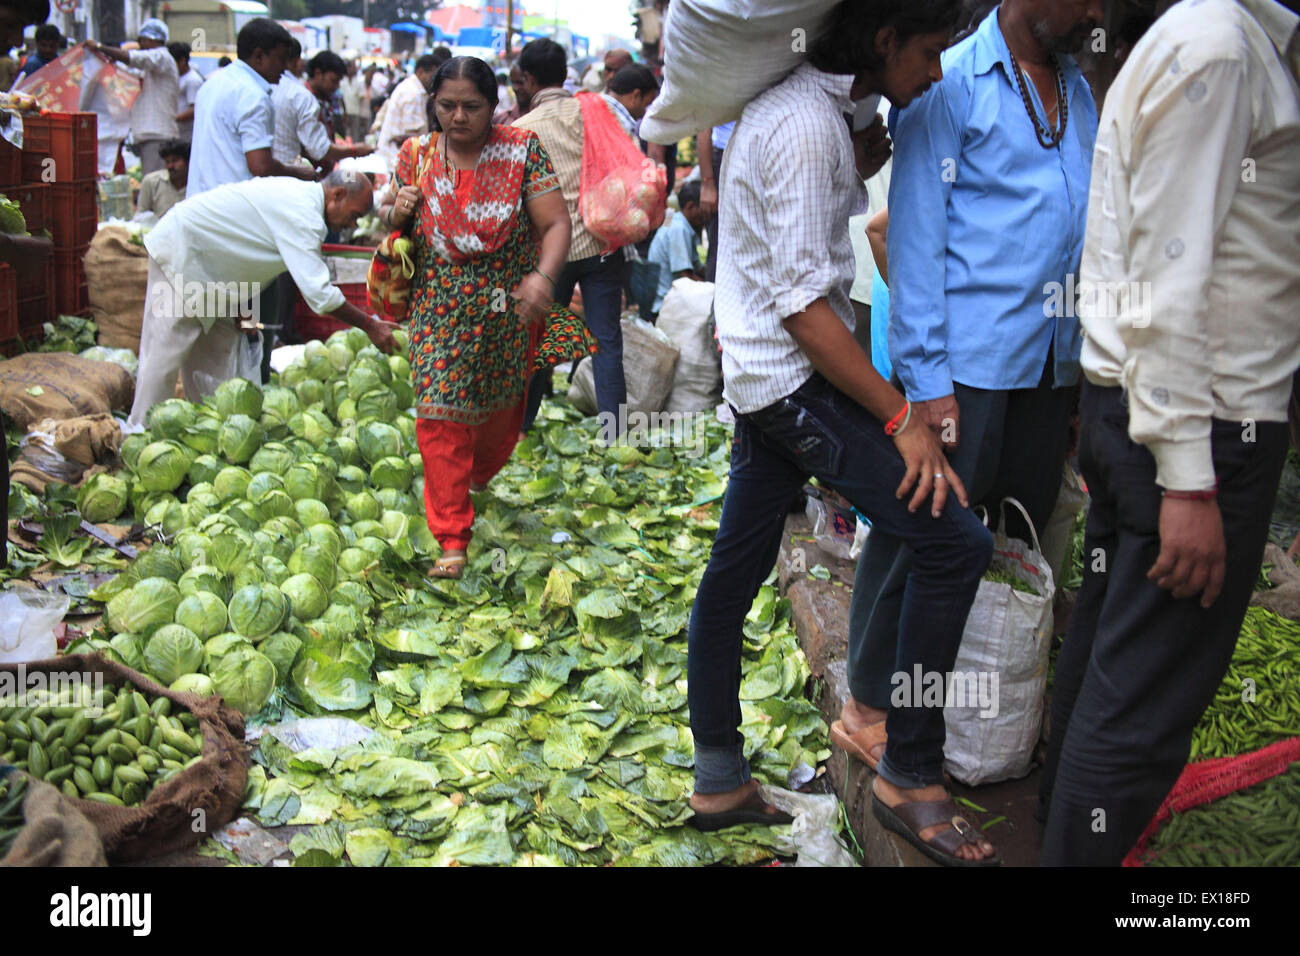 Aug. 22, 2014 - 22 aug 2014 - Mumbai, India :.A woman shopping for vegetables walks on a heap of discarded & waste vegetables at the Dadar Vegetable Market at Mumbai. Hundreds of Tonnes of vegetables are wasted at the Dadar Vegetable Market on a daily basis.India, the world's largest producer of milk and the second-largest producer of fruits and vegetables, is also one of the biggest food wasters in the world - wasting 440 billion rupees worth of fruits, vegetables, and grains every year, according to Emerson Climate Technologies India, part of Emerson, a US-based manufacturing and techno Stock Photo